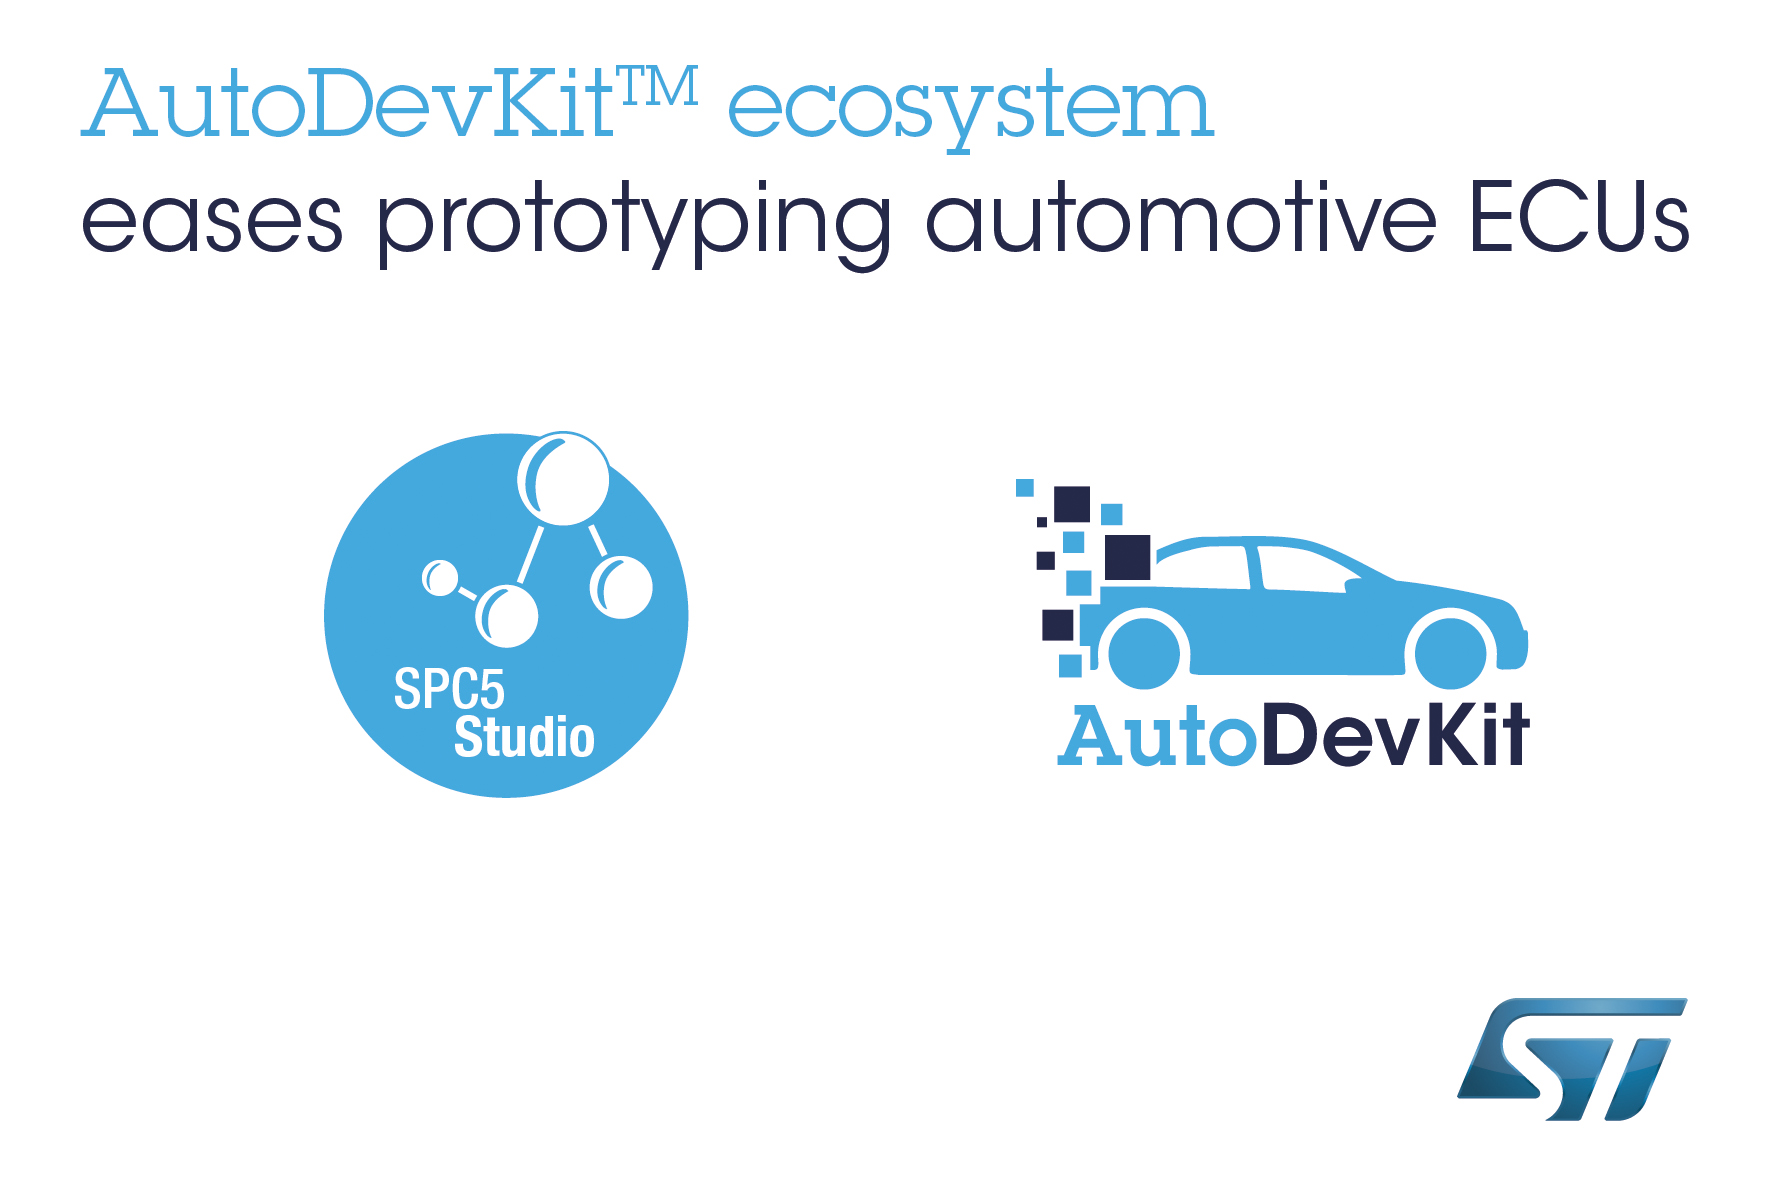 STMicroelectronics Accelerates Innovation in Automotive Electronics with Powerful Development Tools